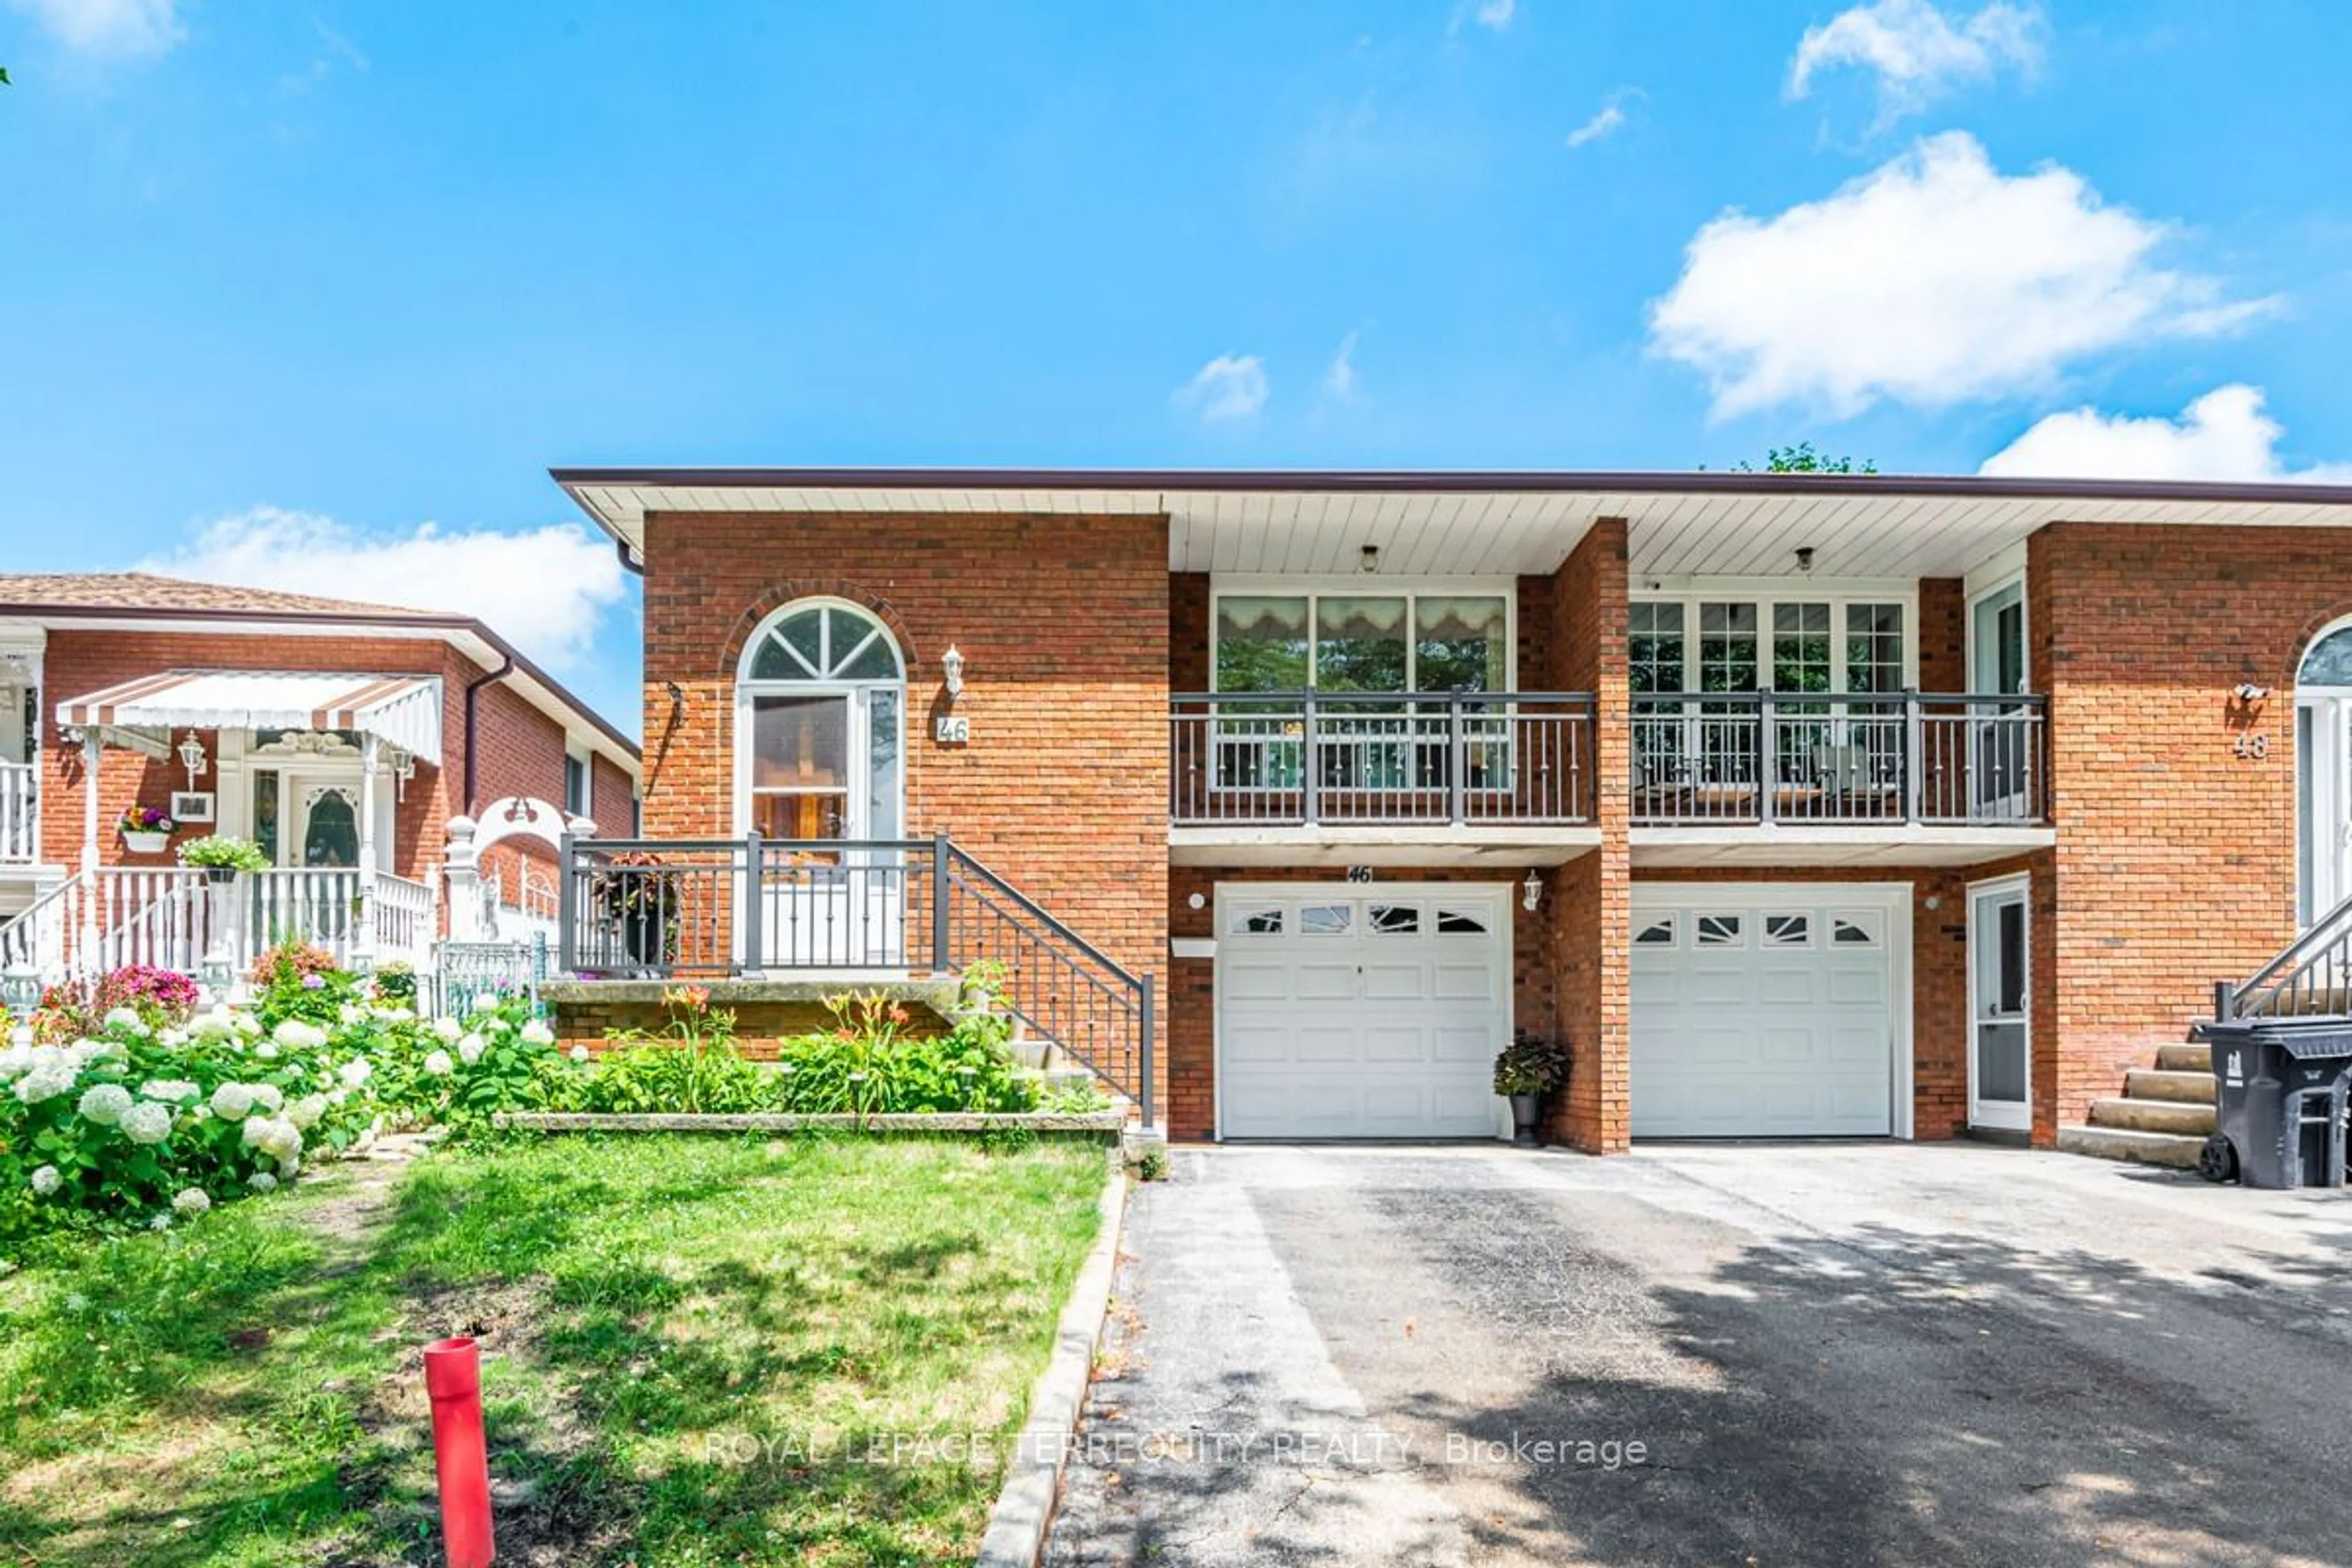 Home with brick exterior material for 46 Fred Bland Cres, Toronto Ontario M1J 3L8